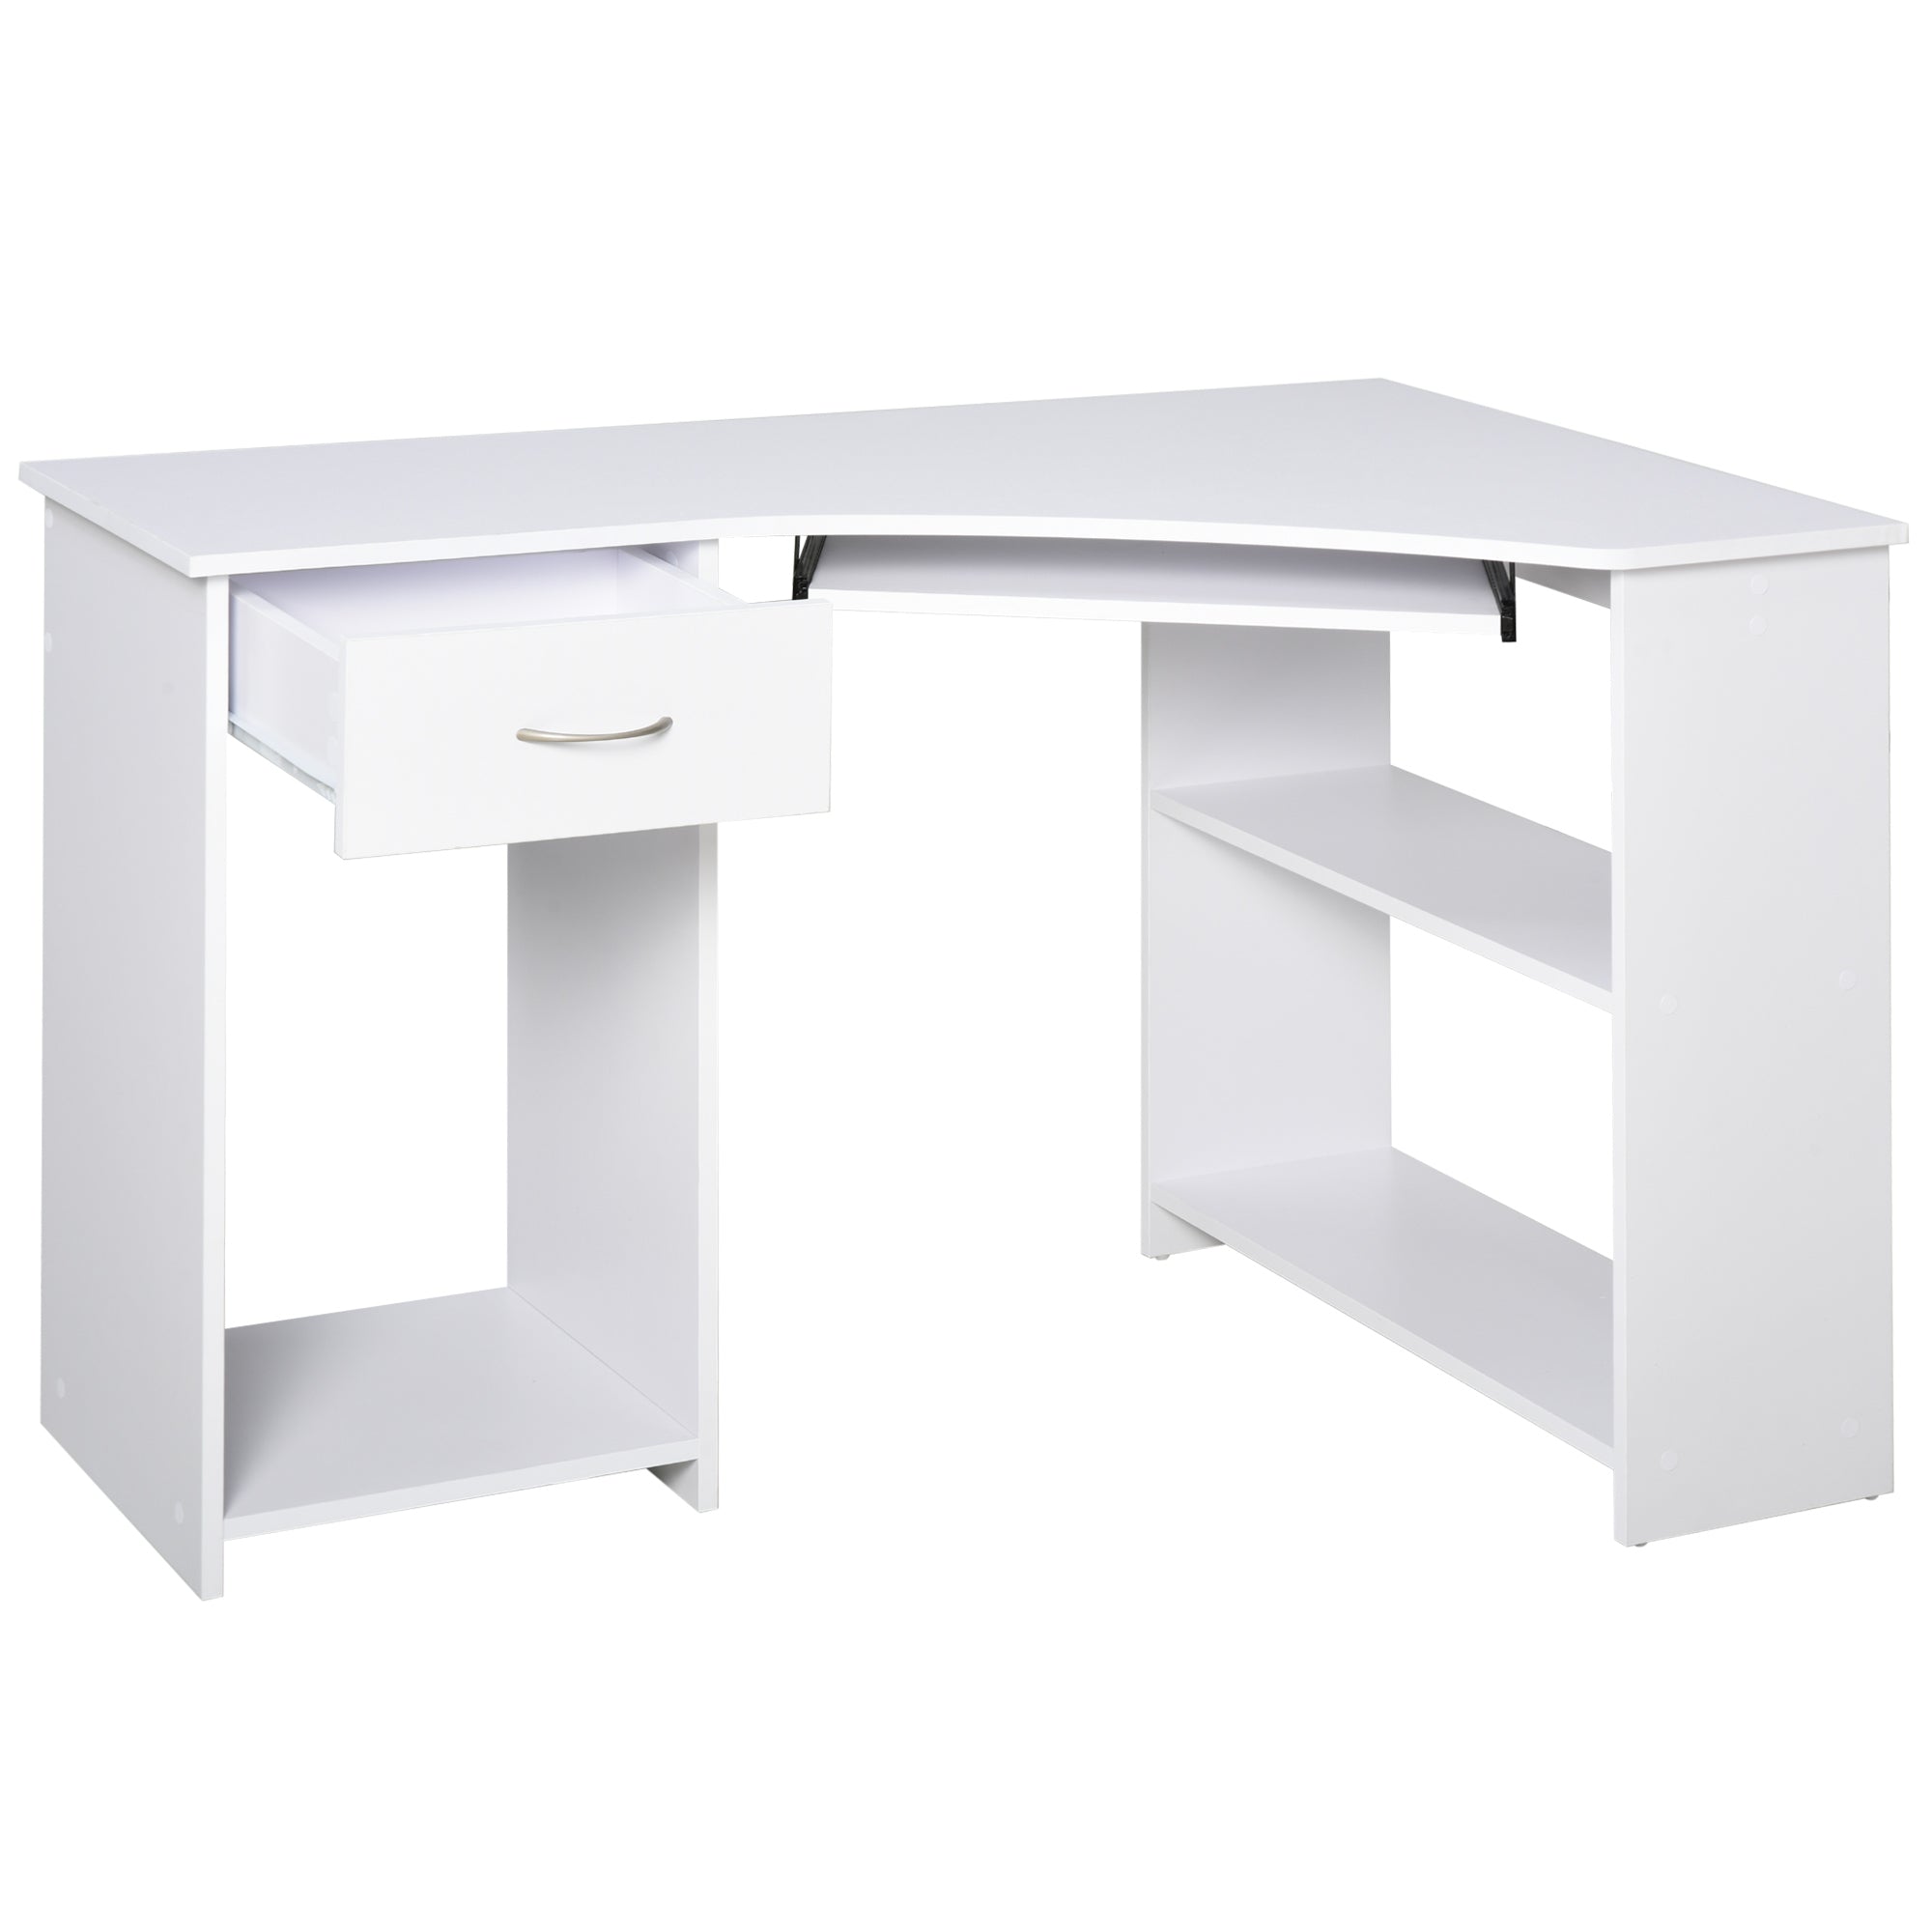 ProperAV L-Shaped Corner Computer Desk & 2-Tier Side Shelves Wide Table Top with Keyboard Tray Office Study Bedroom Furniture - White